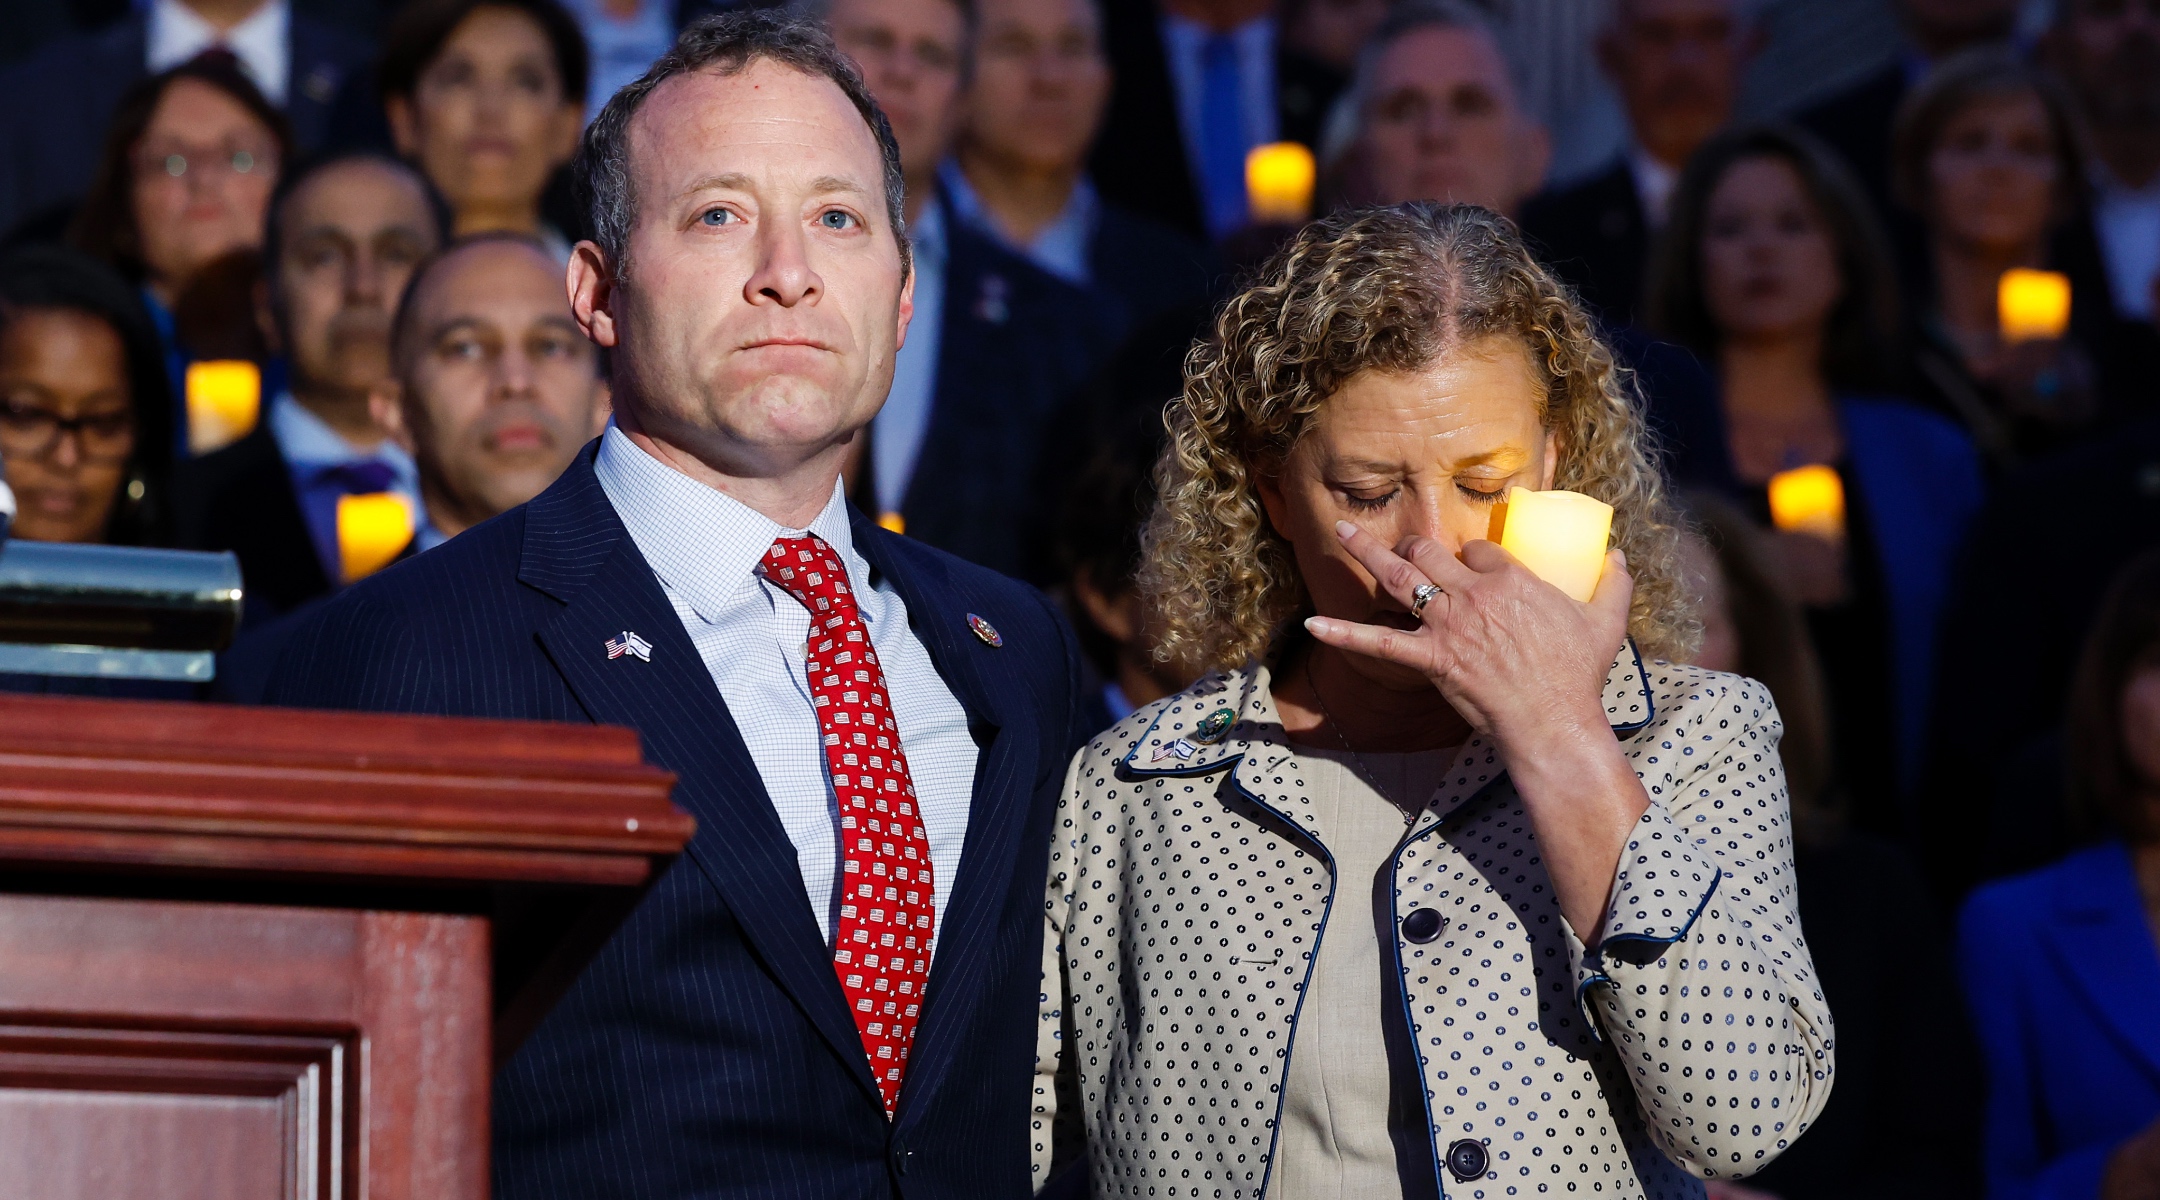 Rep. Josh Gottheimer, a New Jersey Democrat, and Rep. Debbie Wasserman Schultz, a Florida Democrat, listen as Margaret Grun Kibben, the chaplain of the U.S. House of Representatives, leads a prayer during a vigil for Israel on the steps of the U.S. Capitol Building, Oct. 12, 2023. (Anna Moneymaker/Getty Images)